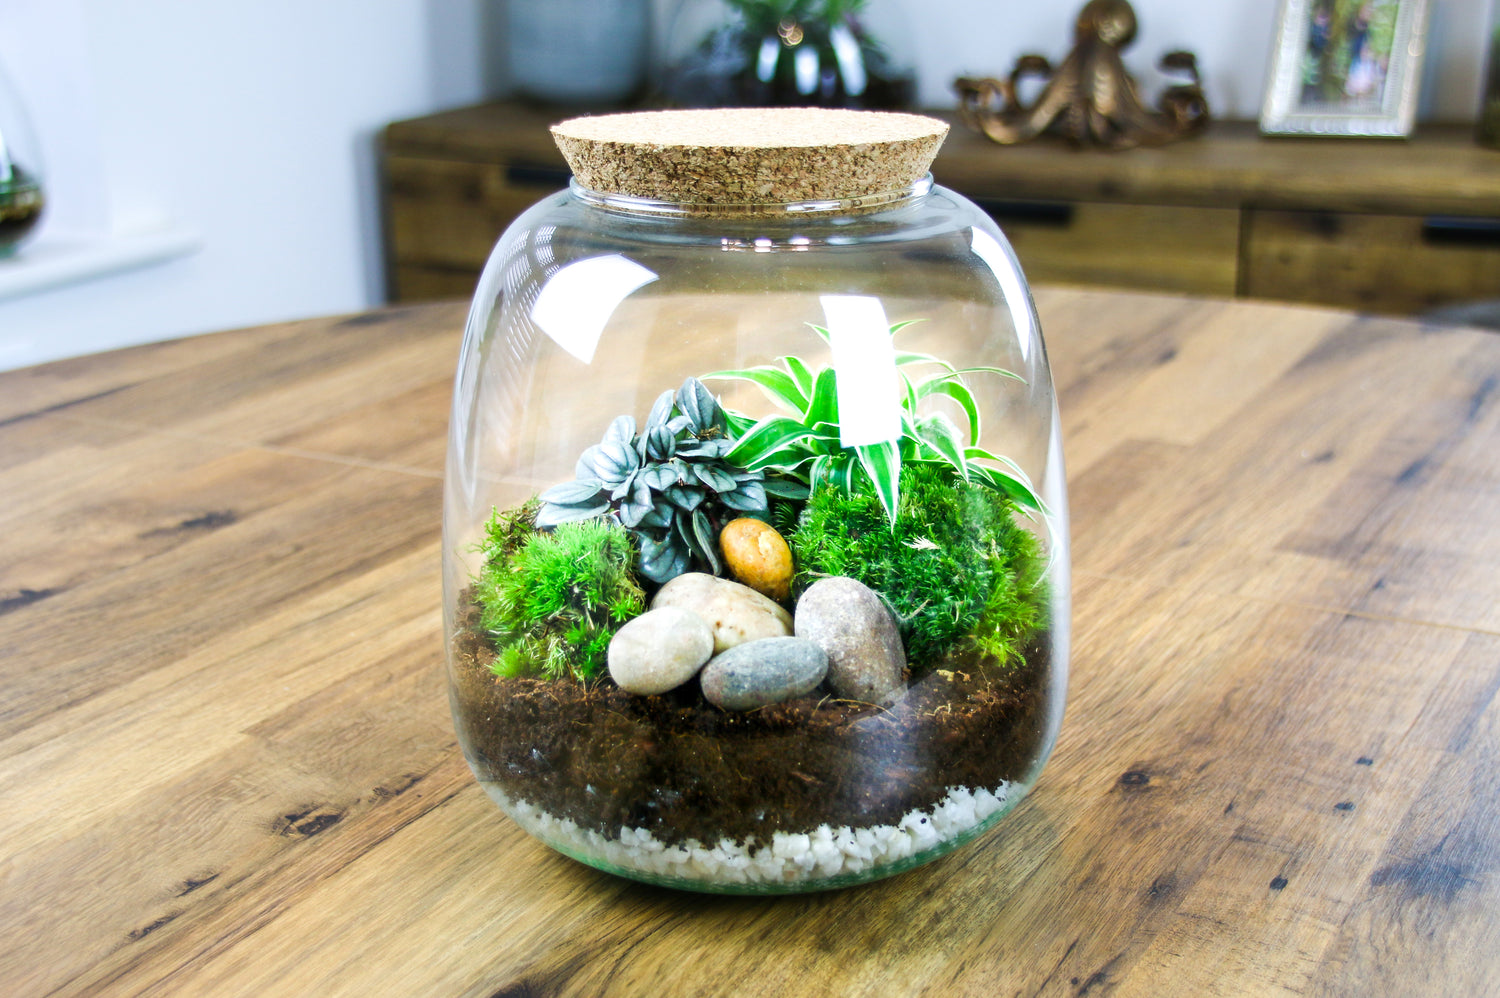 Terrarium kit to buy online with real plants